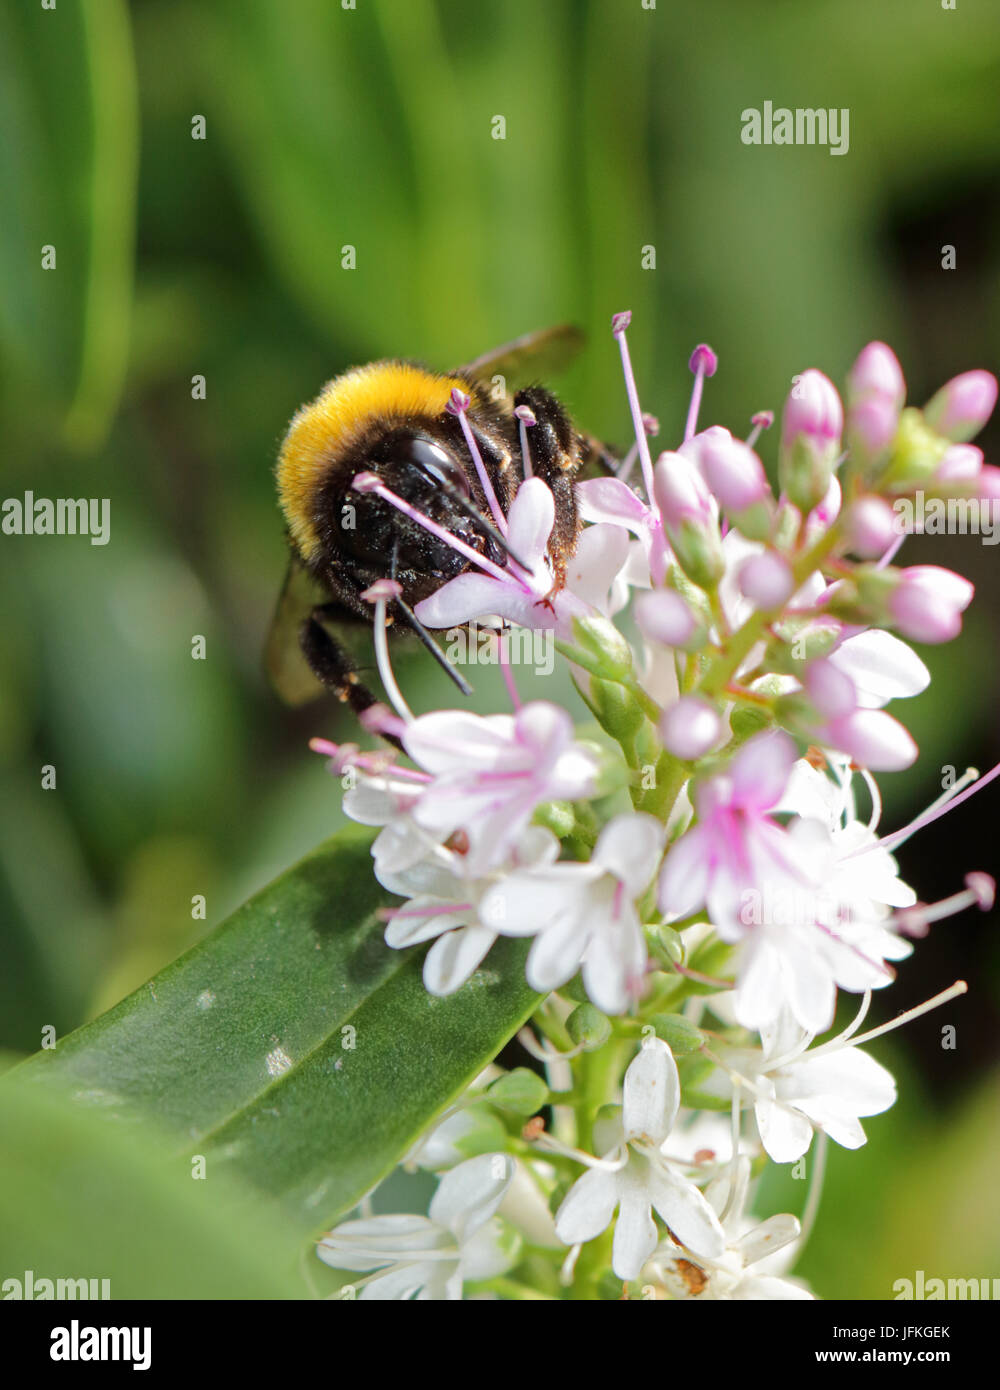 Epsom, Surrey, UK. 1st July, 2017. A bumble bee feeds on the nectar of a pink and white hebe flower, in the sunshine in Epsom, Surrey. Credit: Julia Gavin UK/Alamy Live News Stock Photo